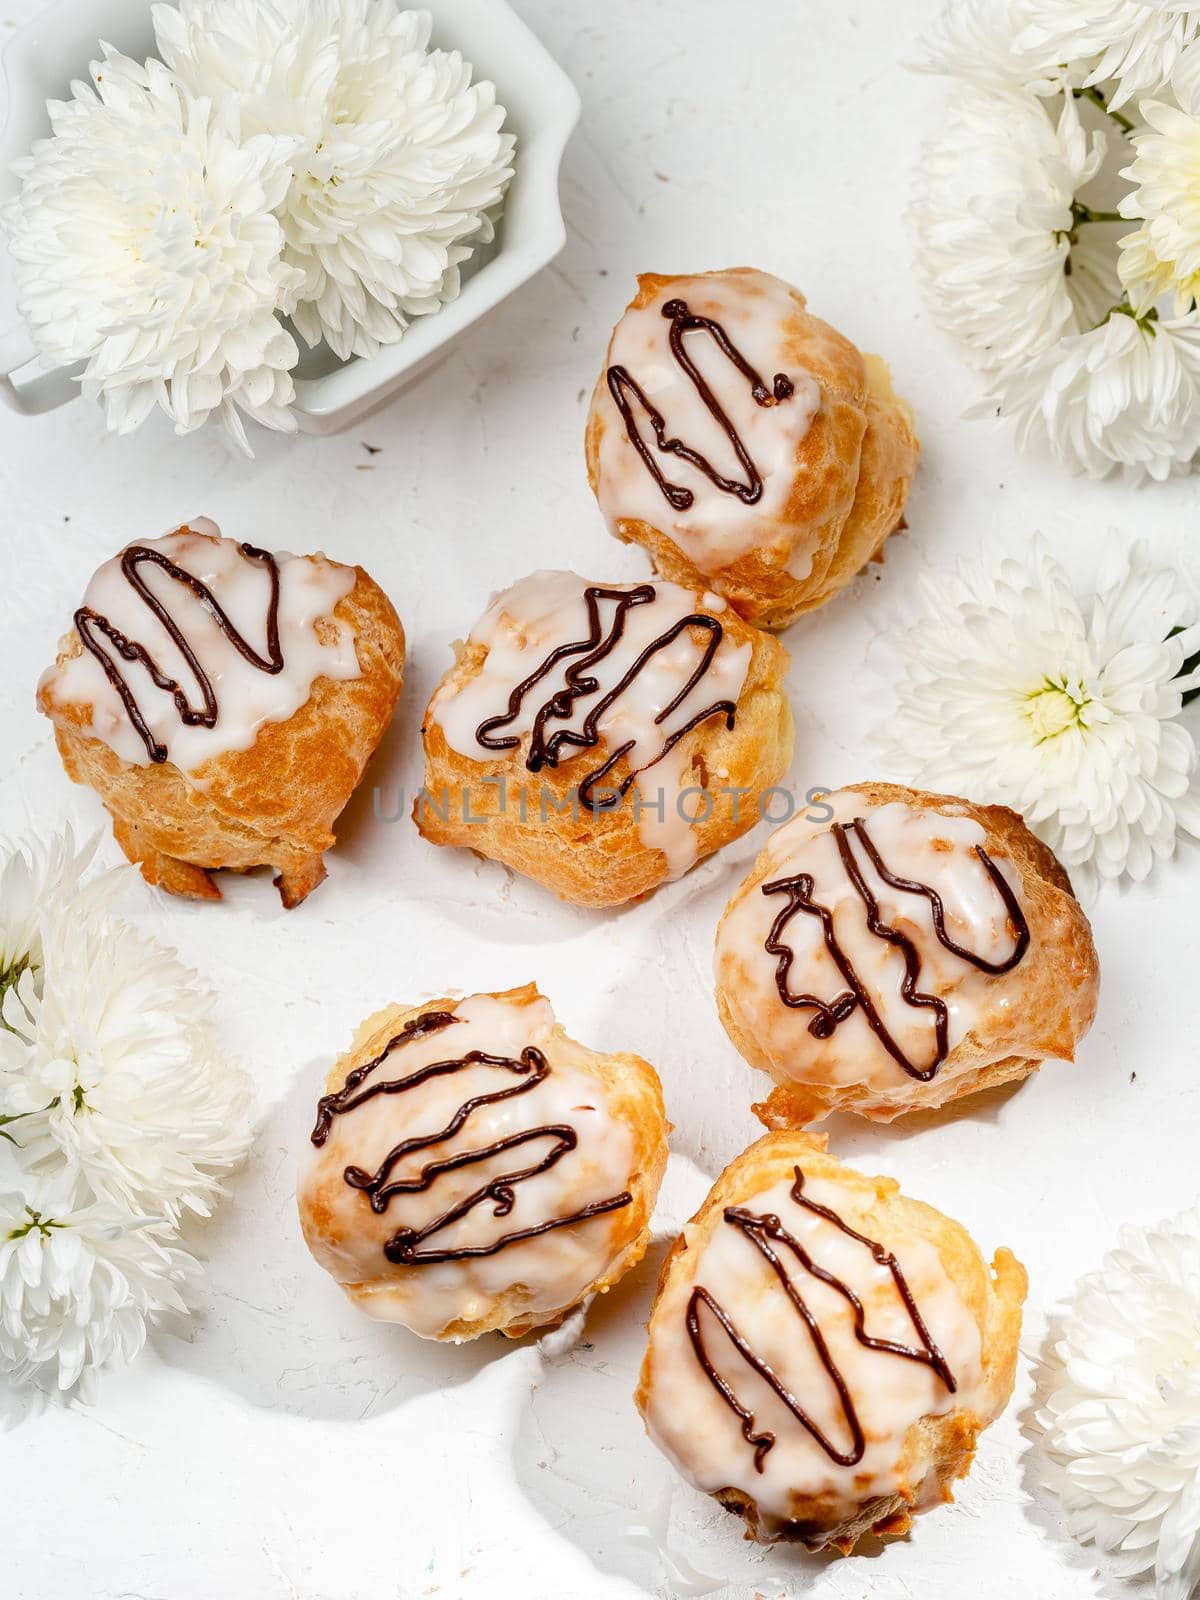 Closeup view of delicious fresh profiteroles filled with custard on white table. Homemade tasty eclairs. Concept of desserts, restaurant food.